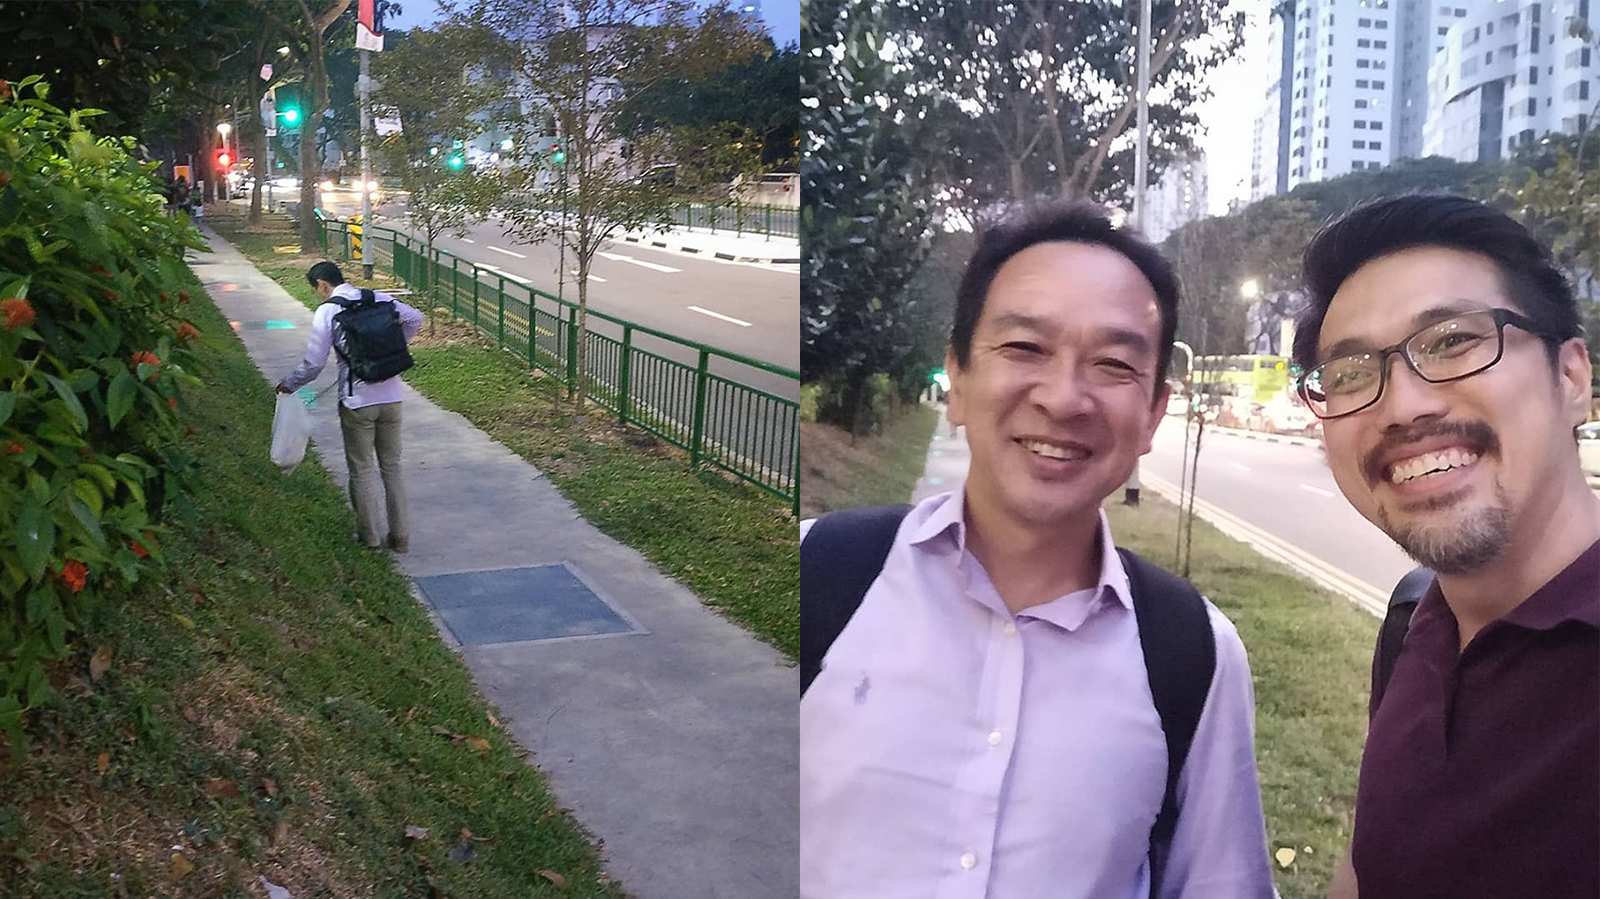 Impressed at how green Singapore is, kind foreigner does his part to keep it clean